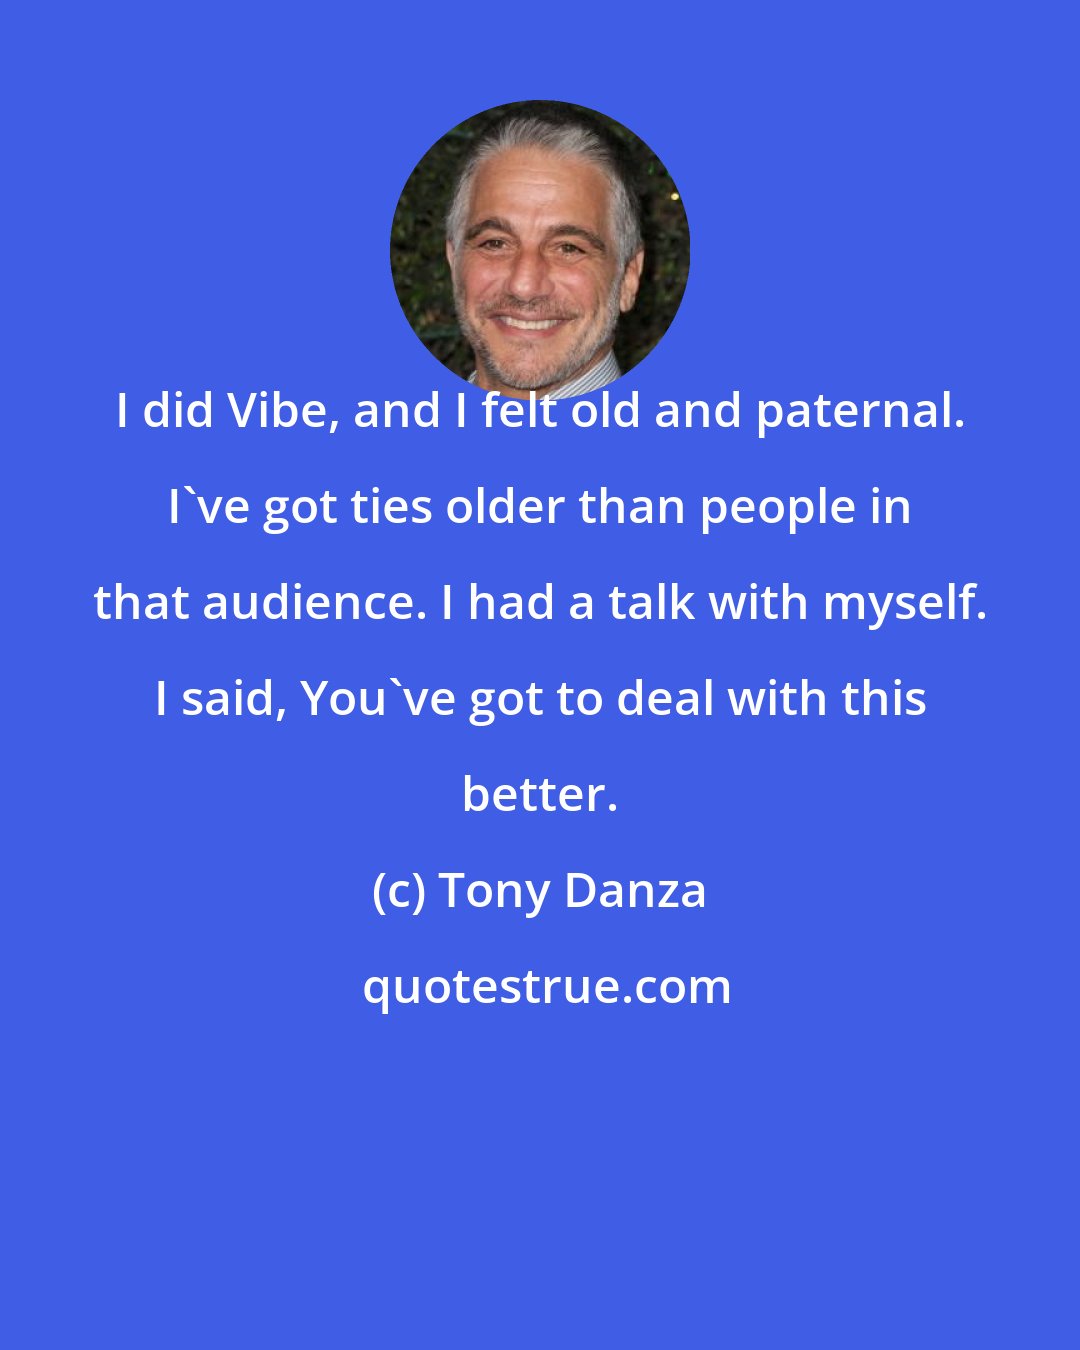 Tony Danza: I did Vibe, and I felt old and paternal. I've got ties older than people in that audience. I had a talk with myself. I said, You've got to deal with this better.